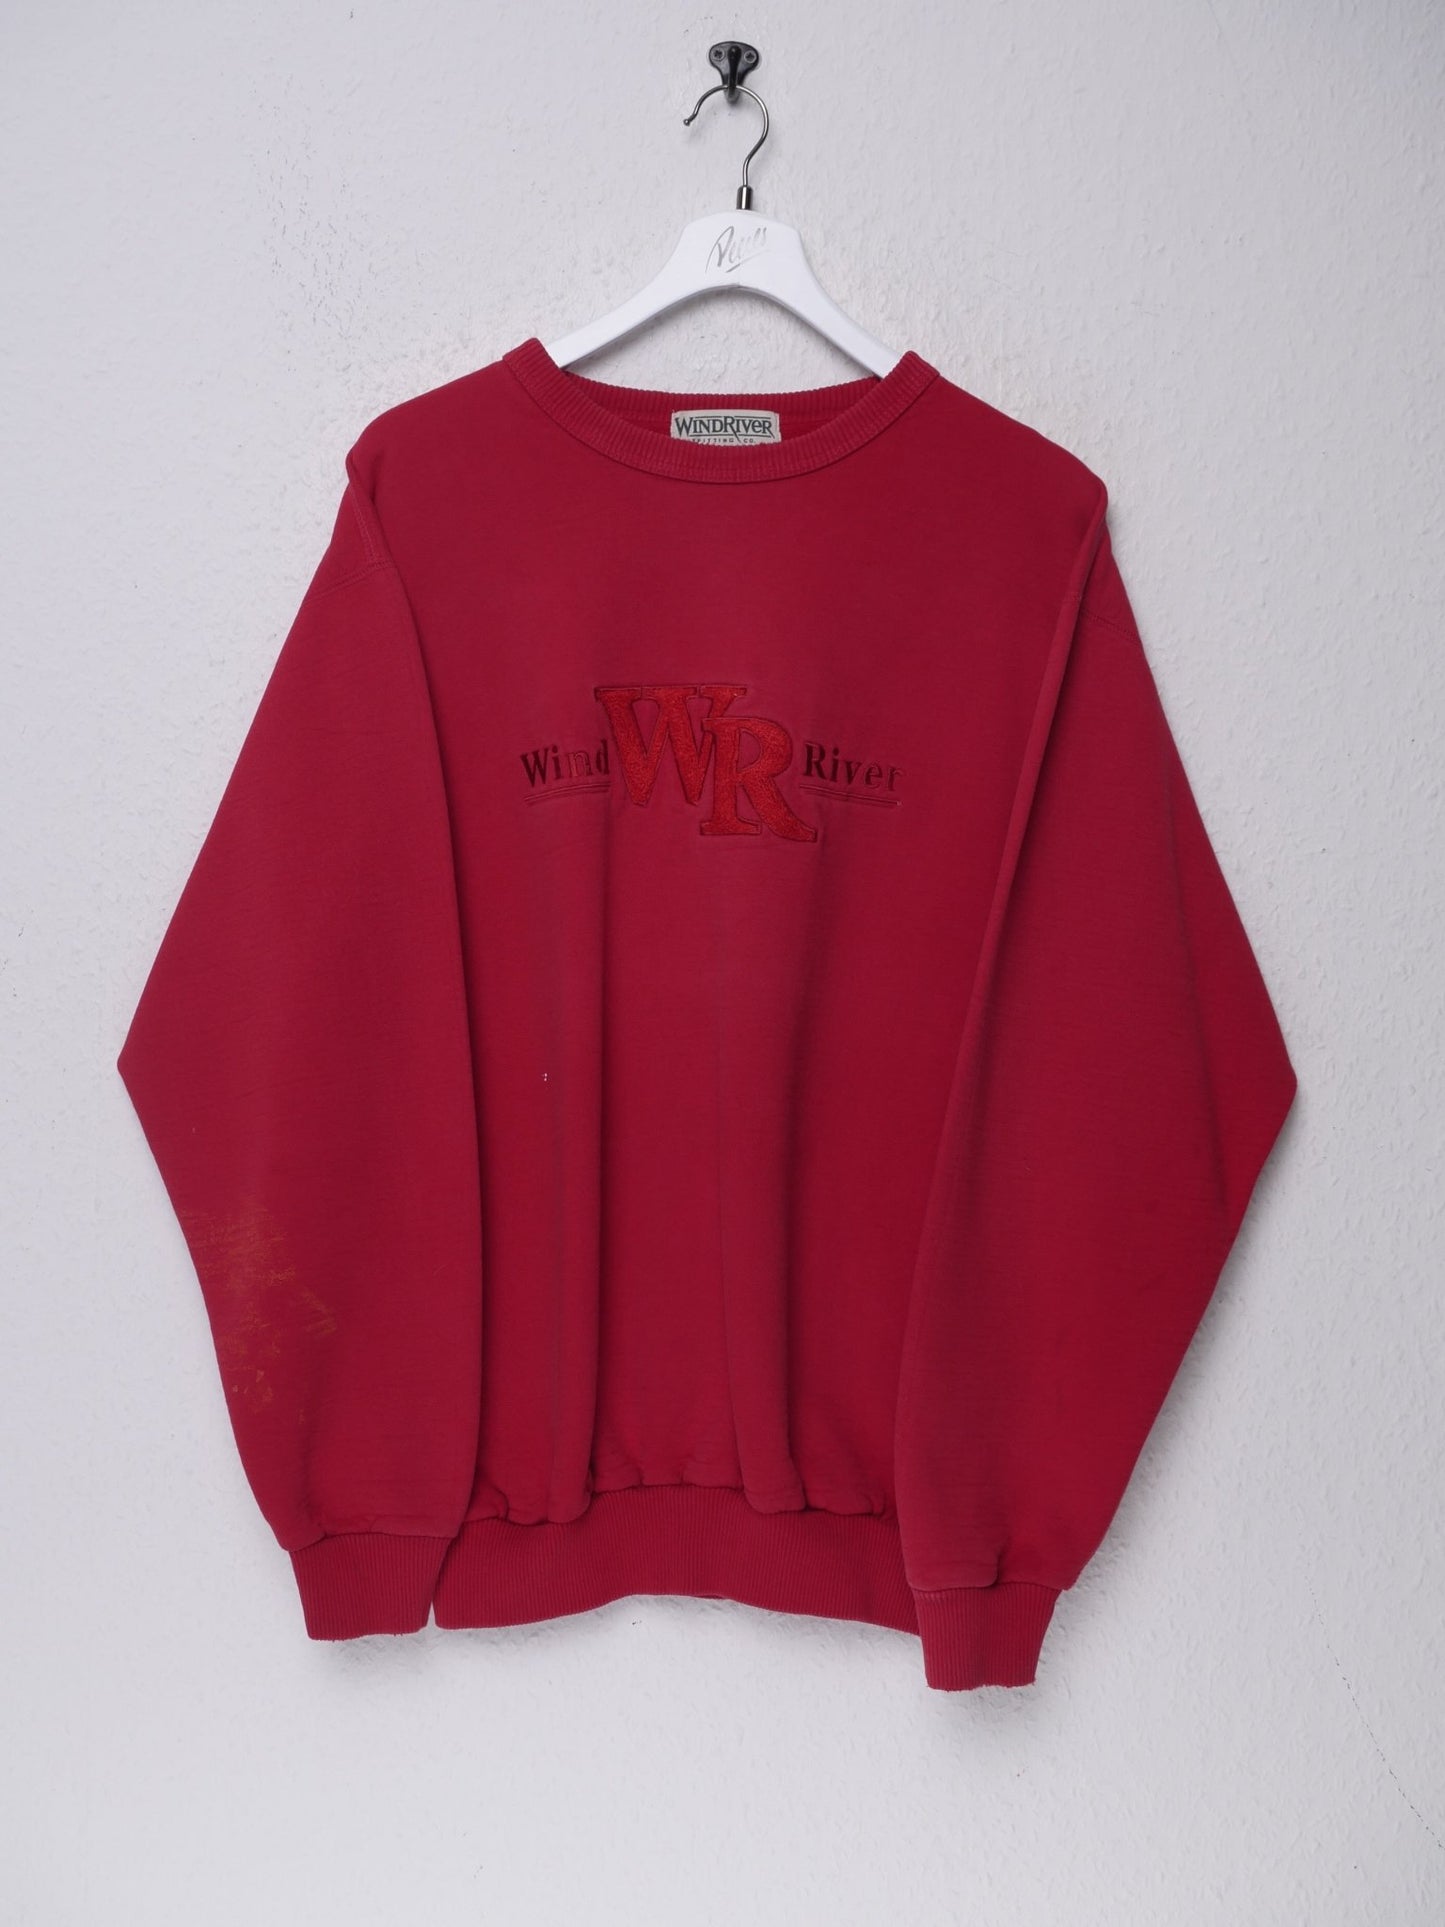 Windriver embroidered Spellout red Vintage Sweater - Peeces